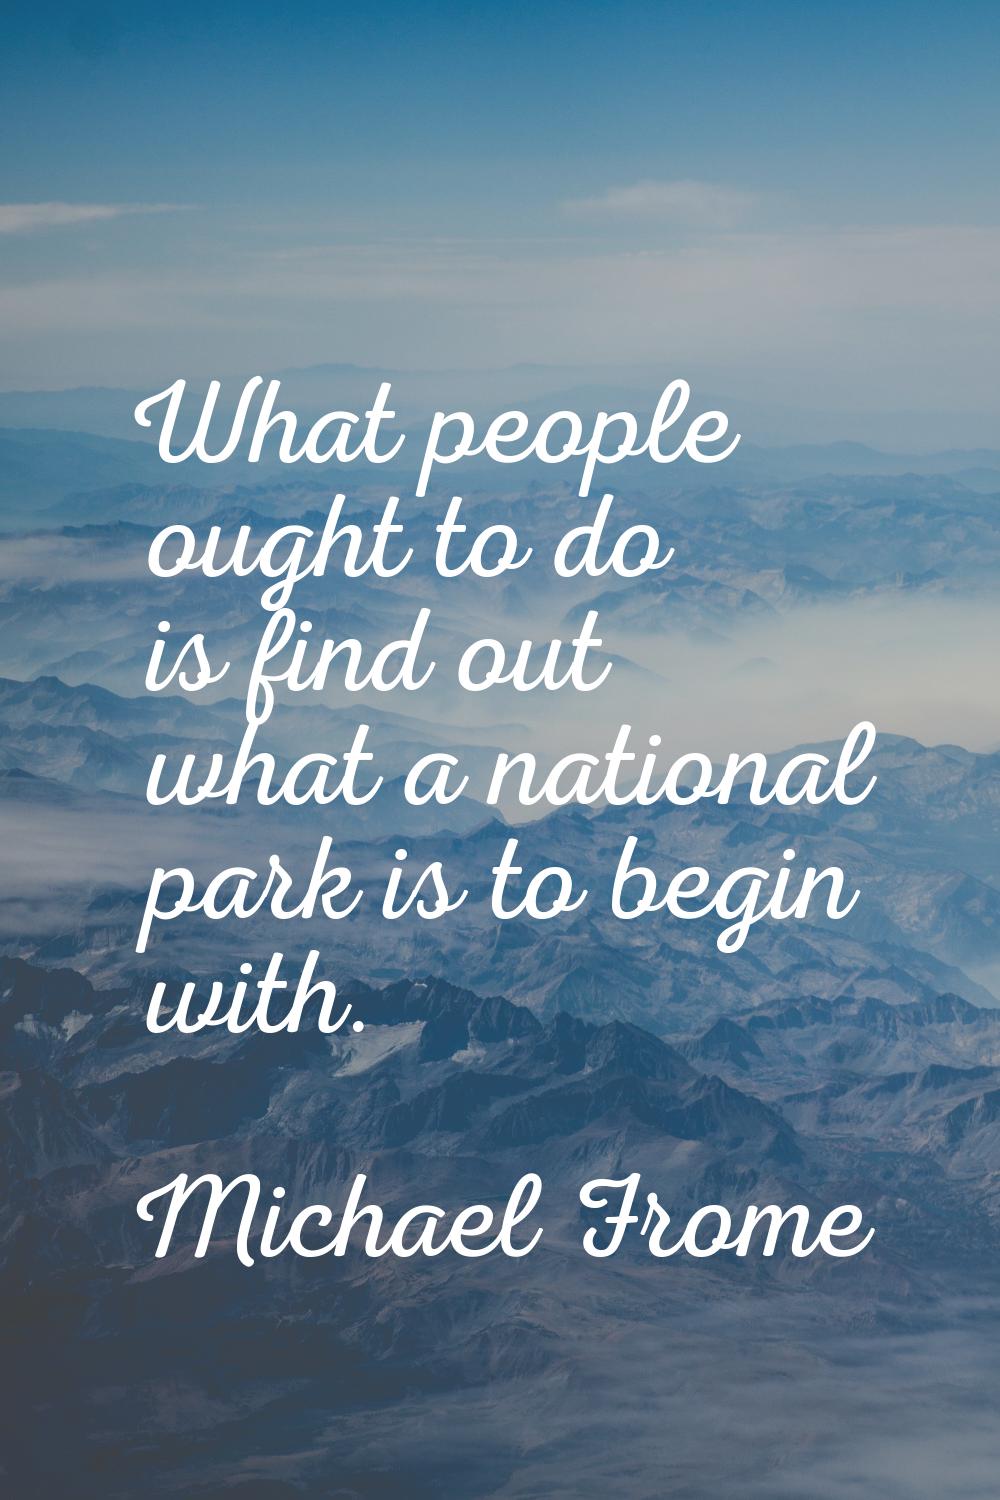 What people ought to do is find out what a national park is to begin with.